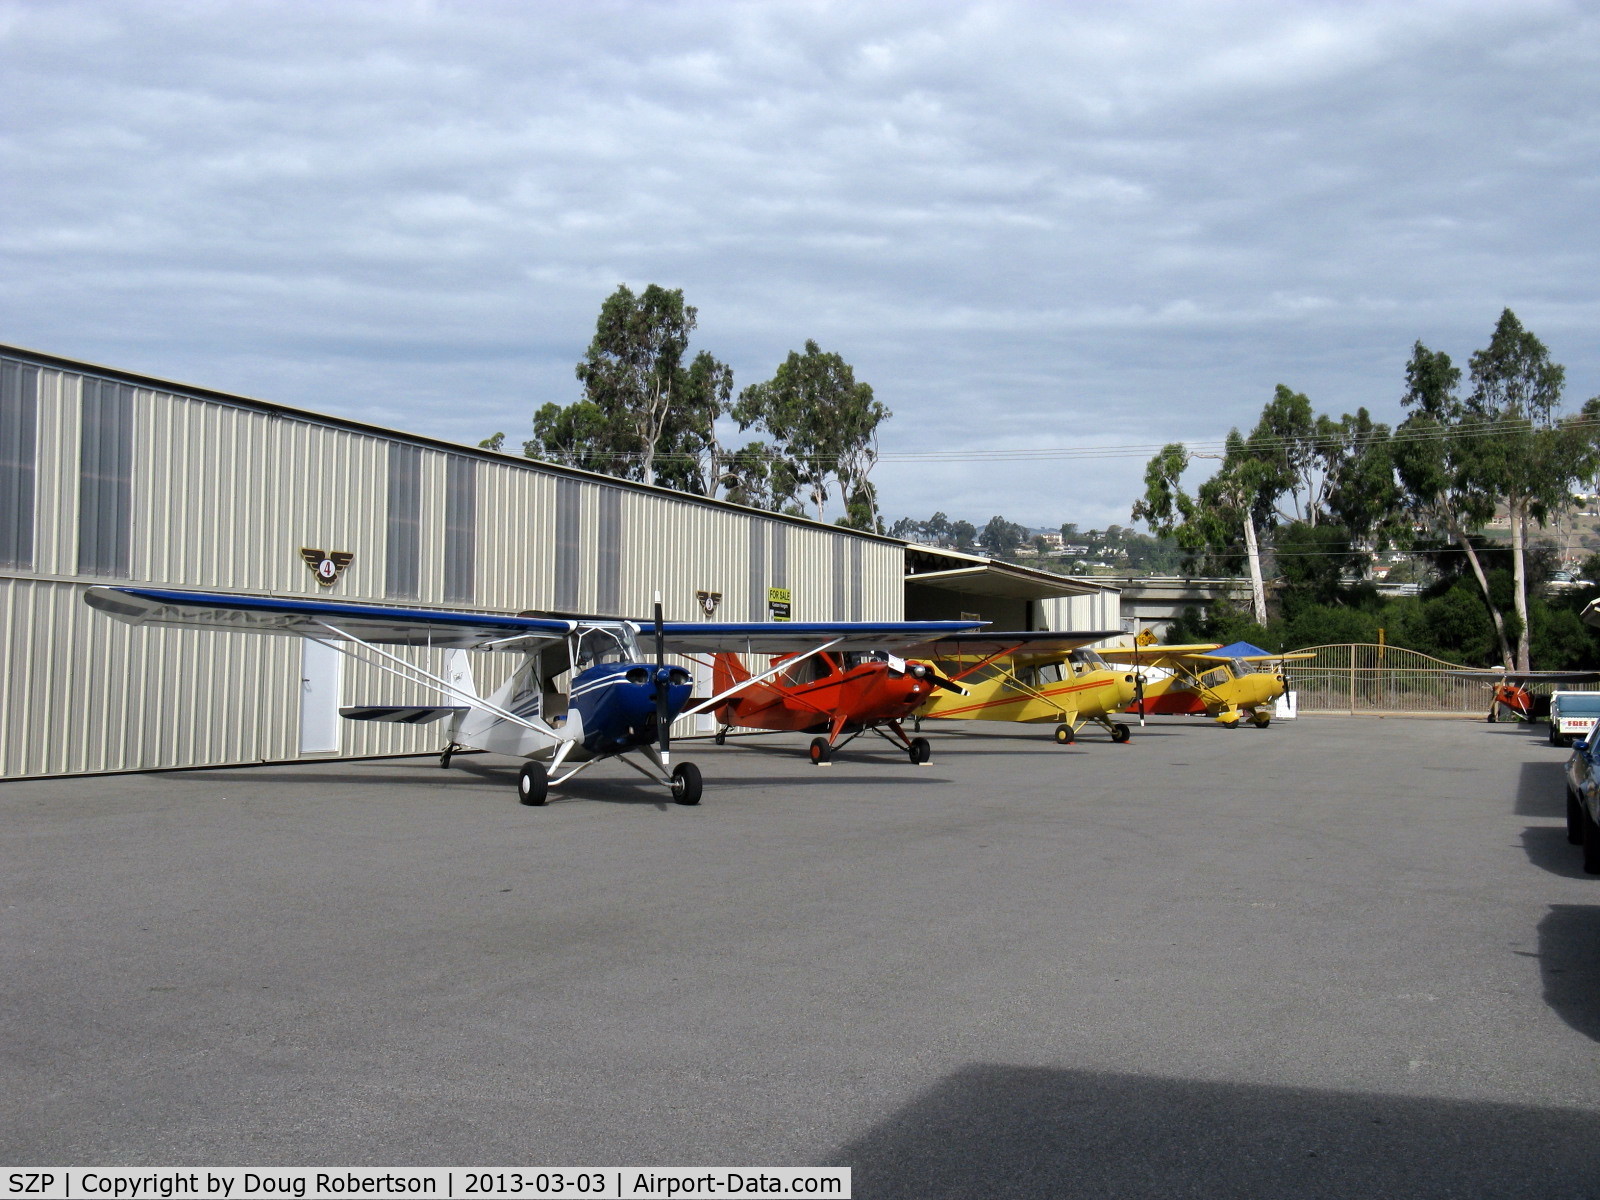 Santa Paula Airport (SZP) - First Sunday Aviation Museum of Santa Paula with four 1946 Aeronca 7AC CHAMPIONs on the ramp. Early photo-one more 7AC arrived plus a 1946 11AC Chief parked on the nearby transient ramp.